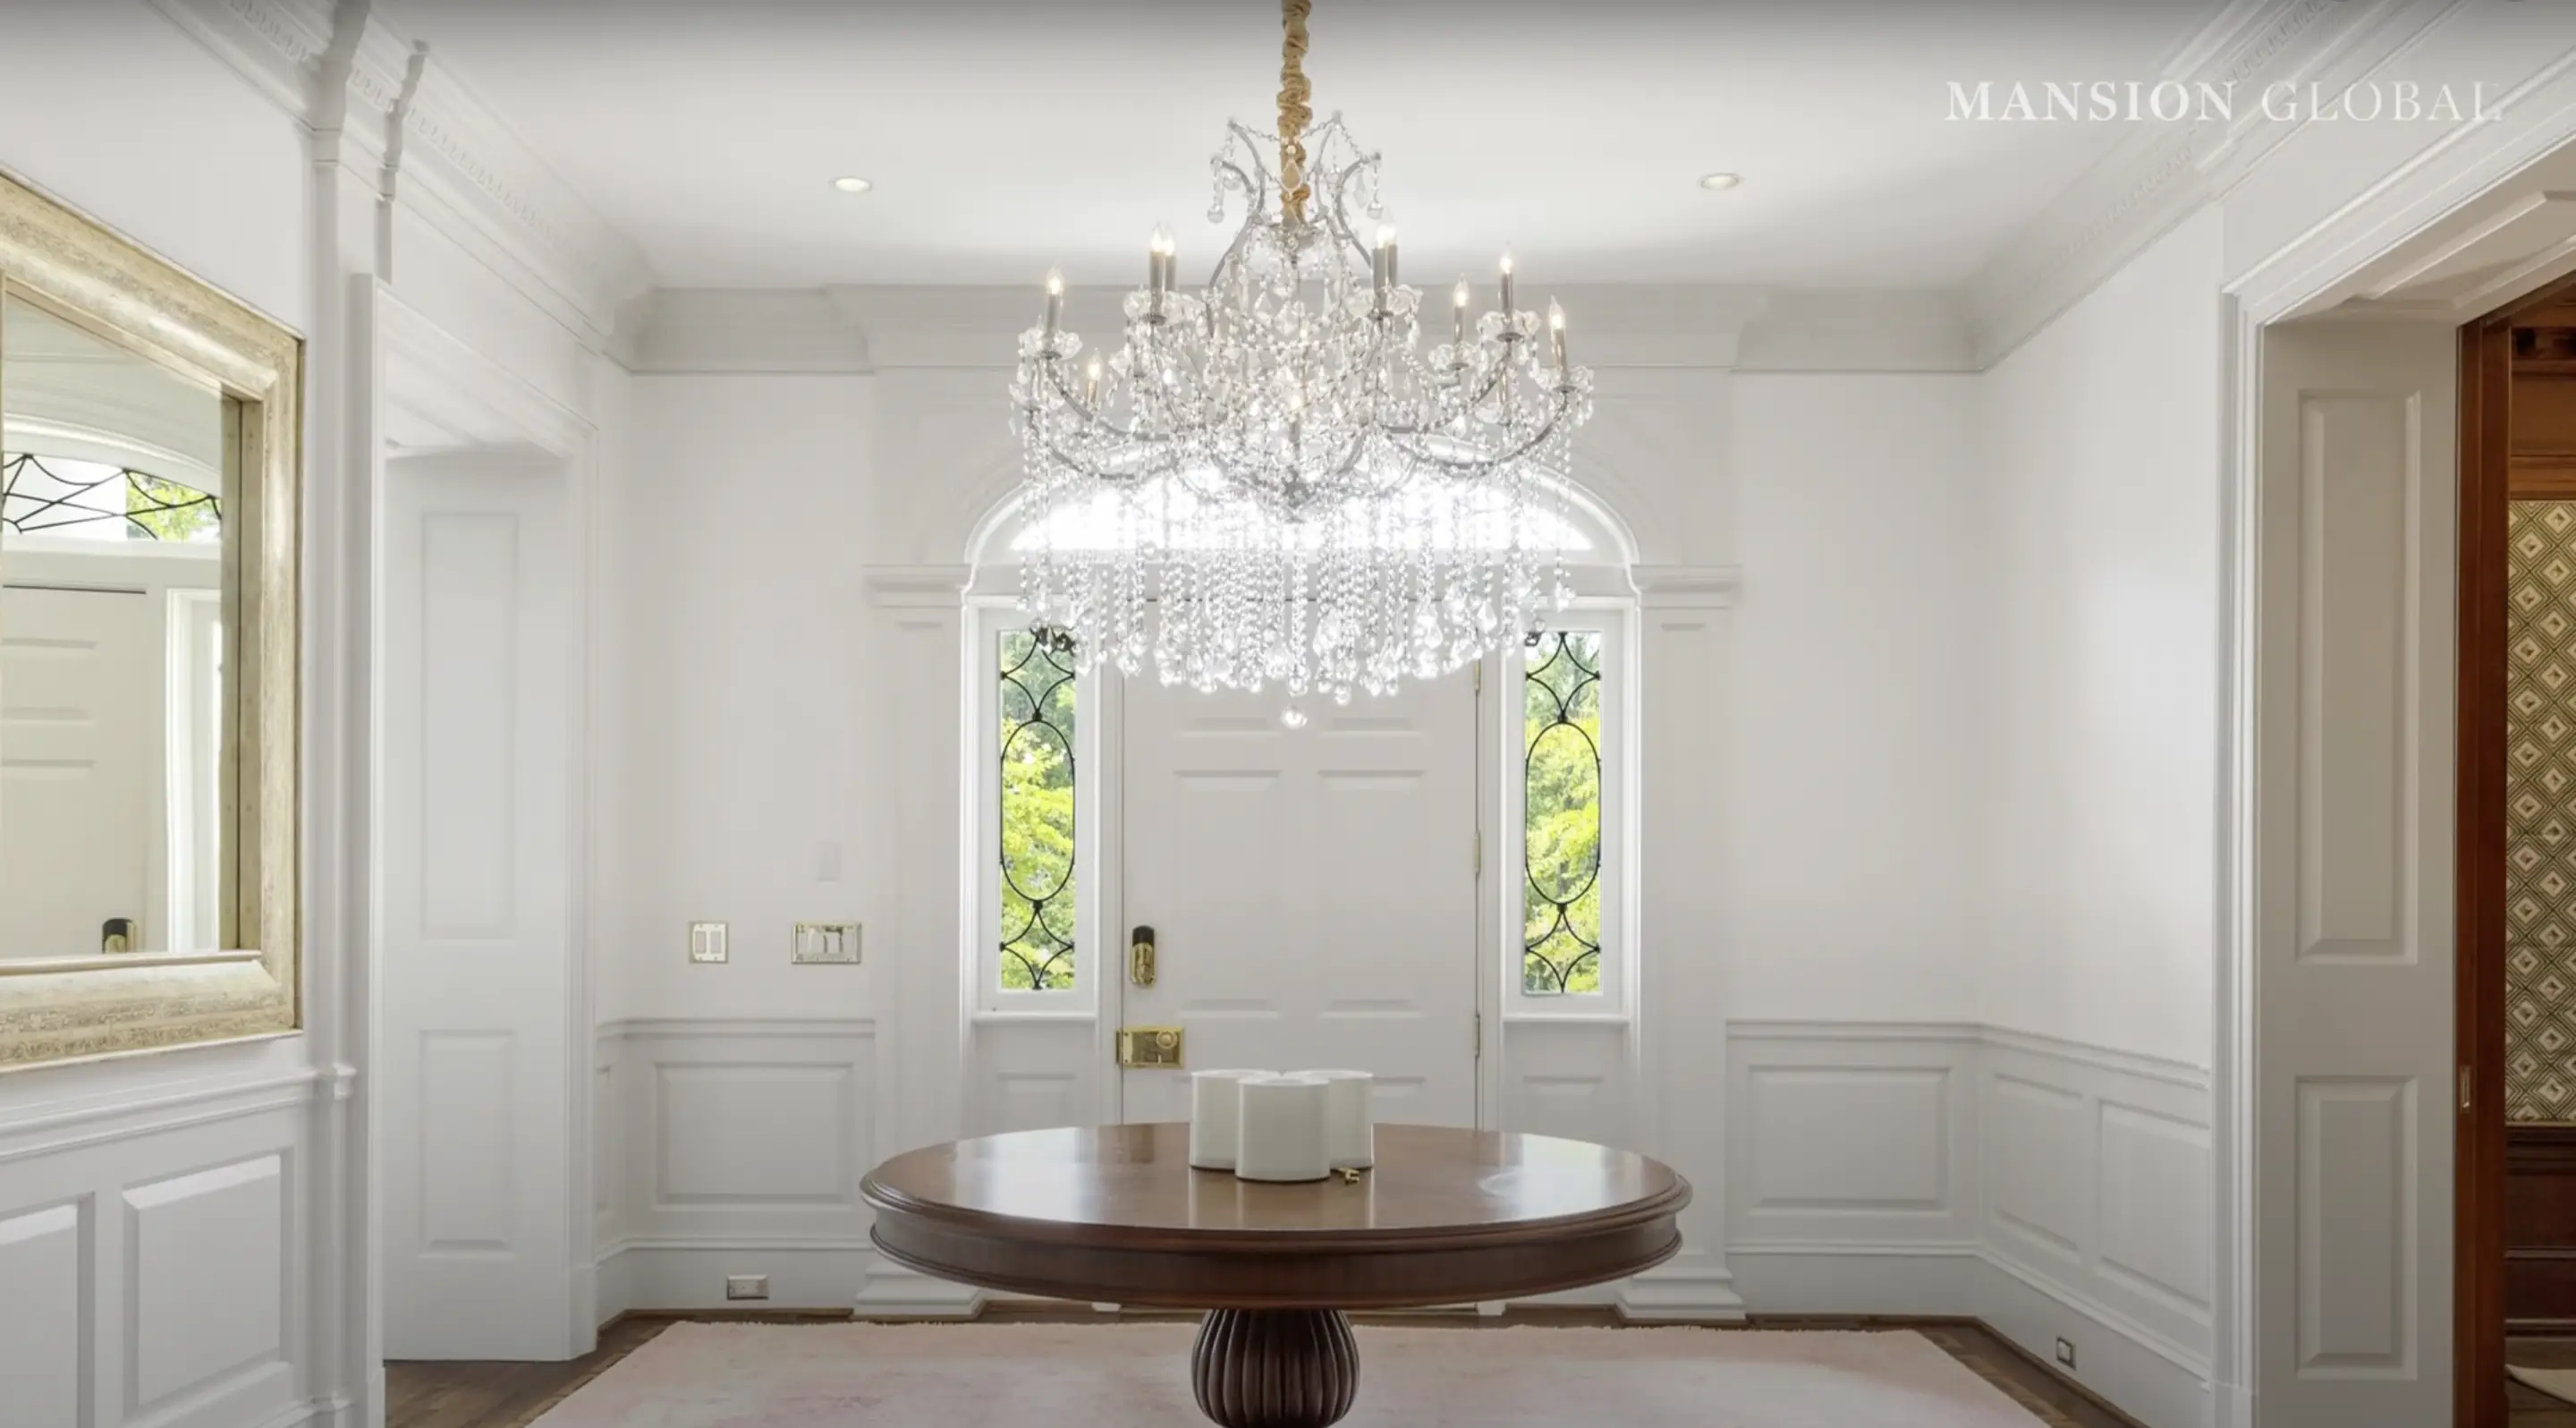 Mariah Carey's former mansion in Atlanta, Georgia, from a video dated March 16, 2023 | Source: Youtube.com/@mg-beckiestrum-lizlucking